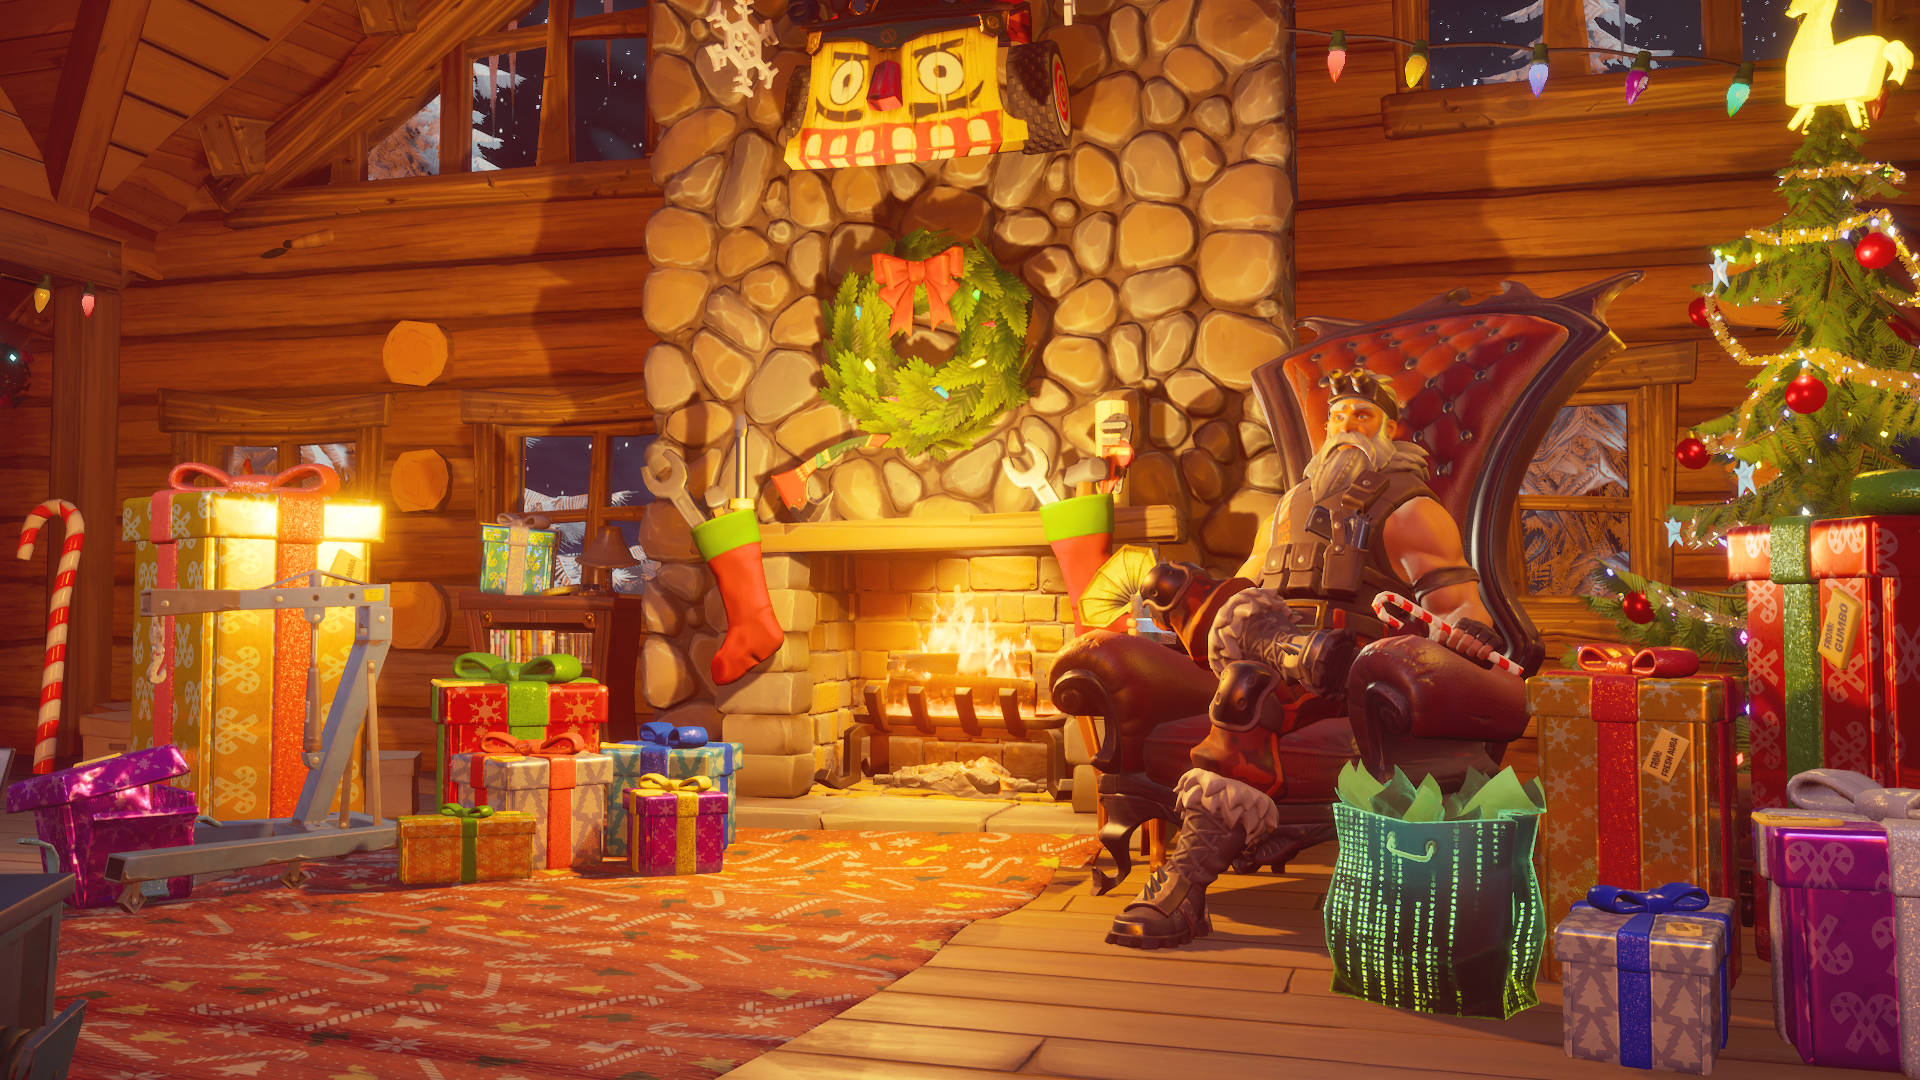 How to warm yourself at the Yule log in the Fortnite Cozy Lodge